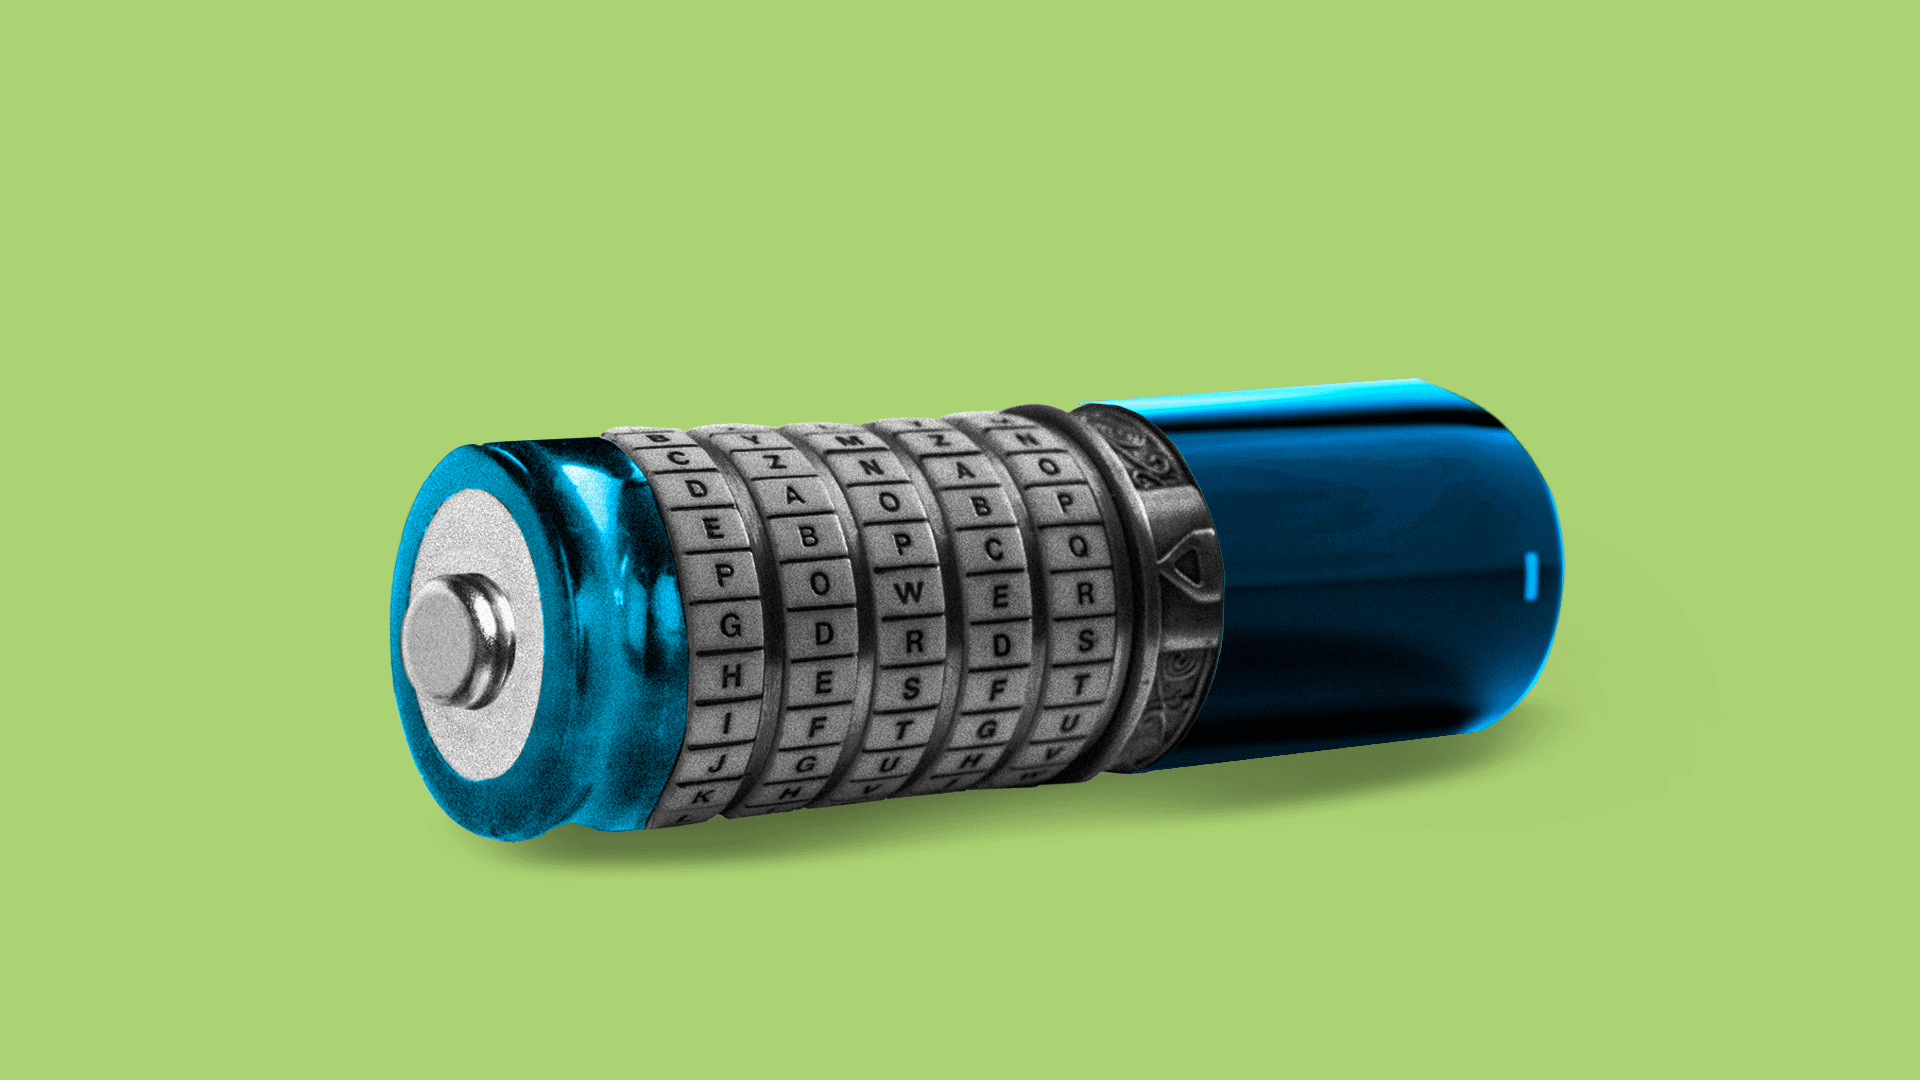  Illustration of a battery as a cryptex spelling out the word power.